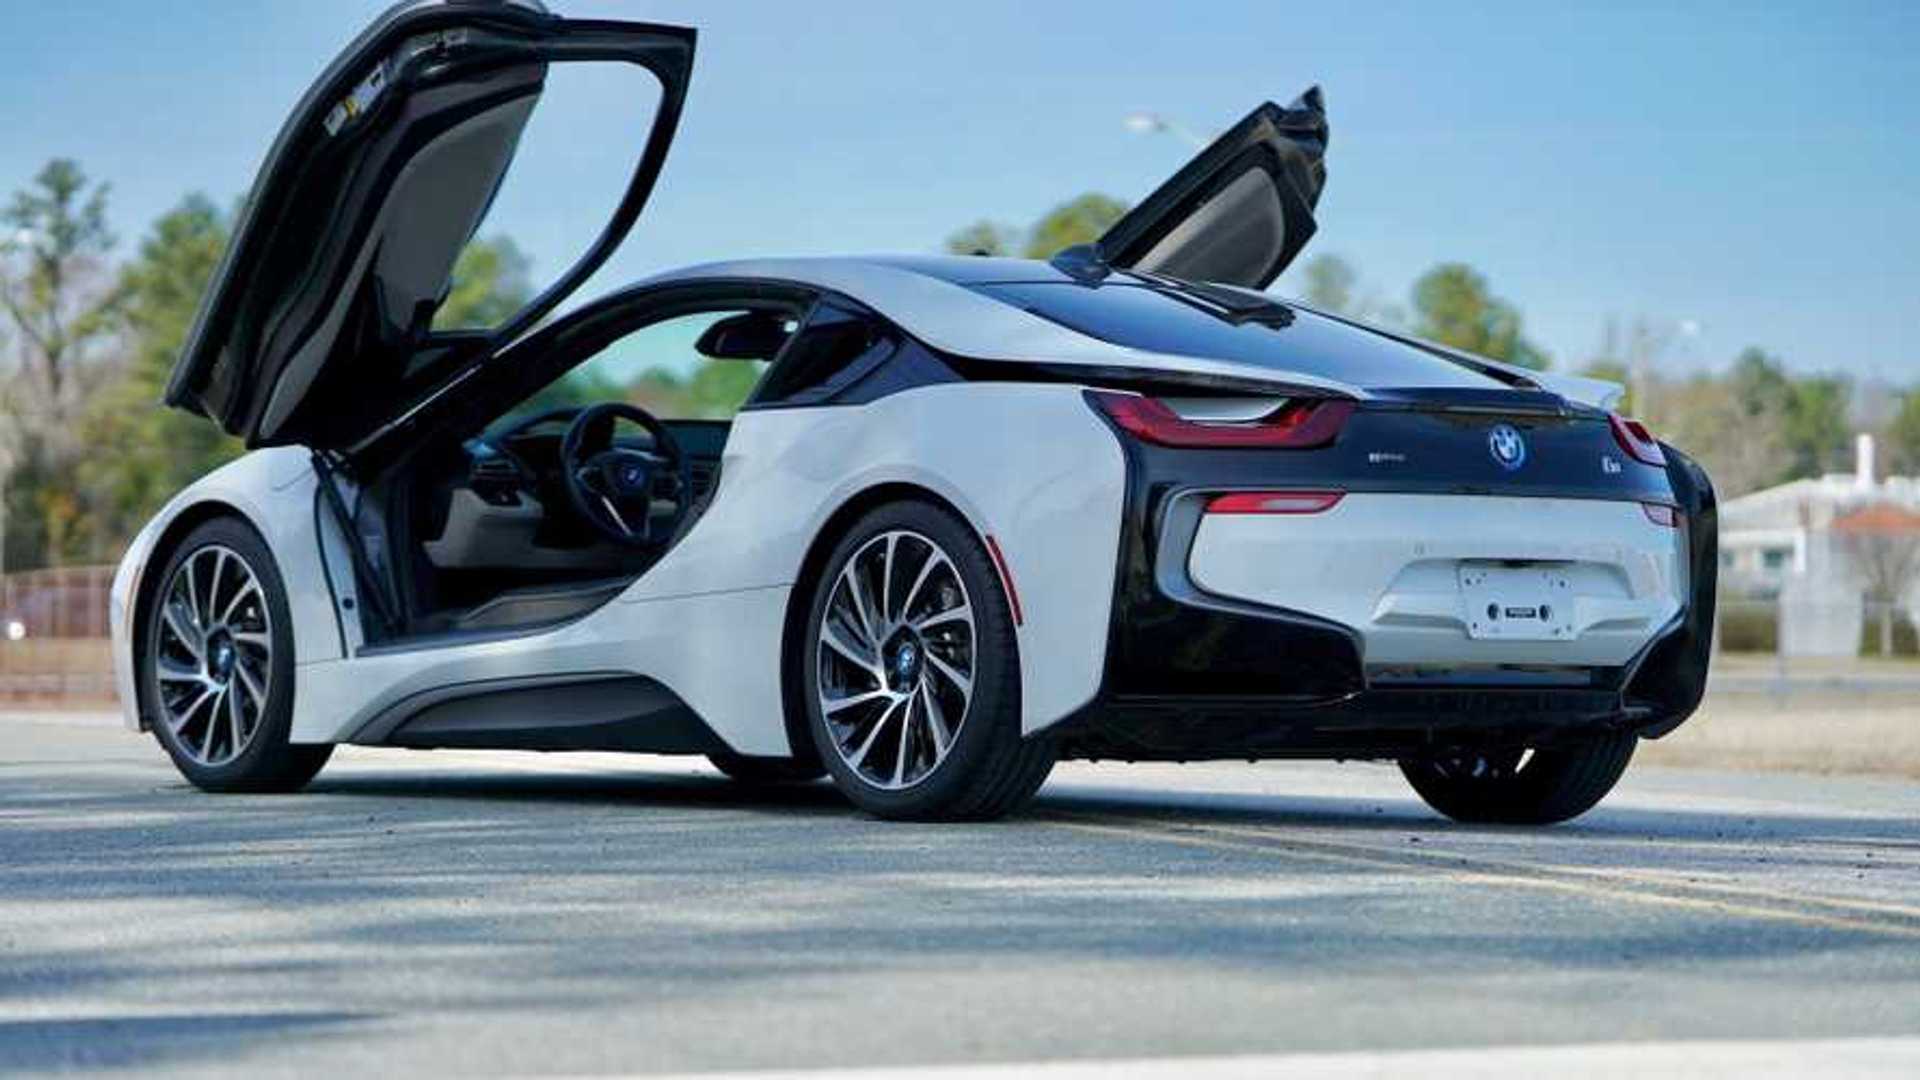 Let This BMW i8 Take You Back To The Future